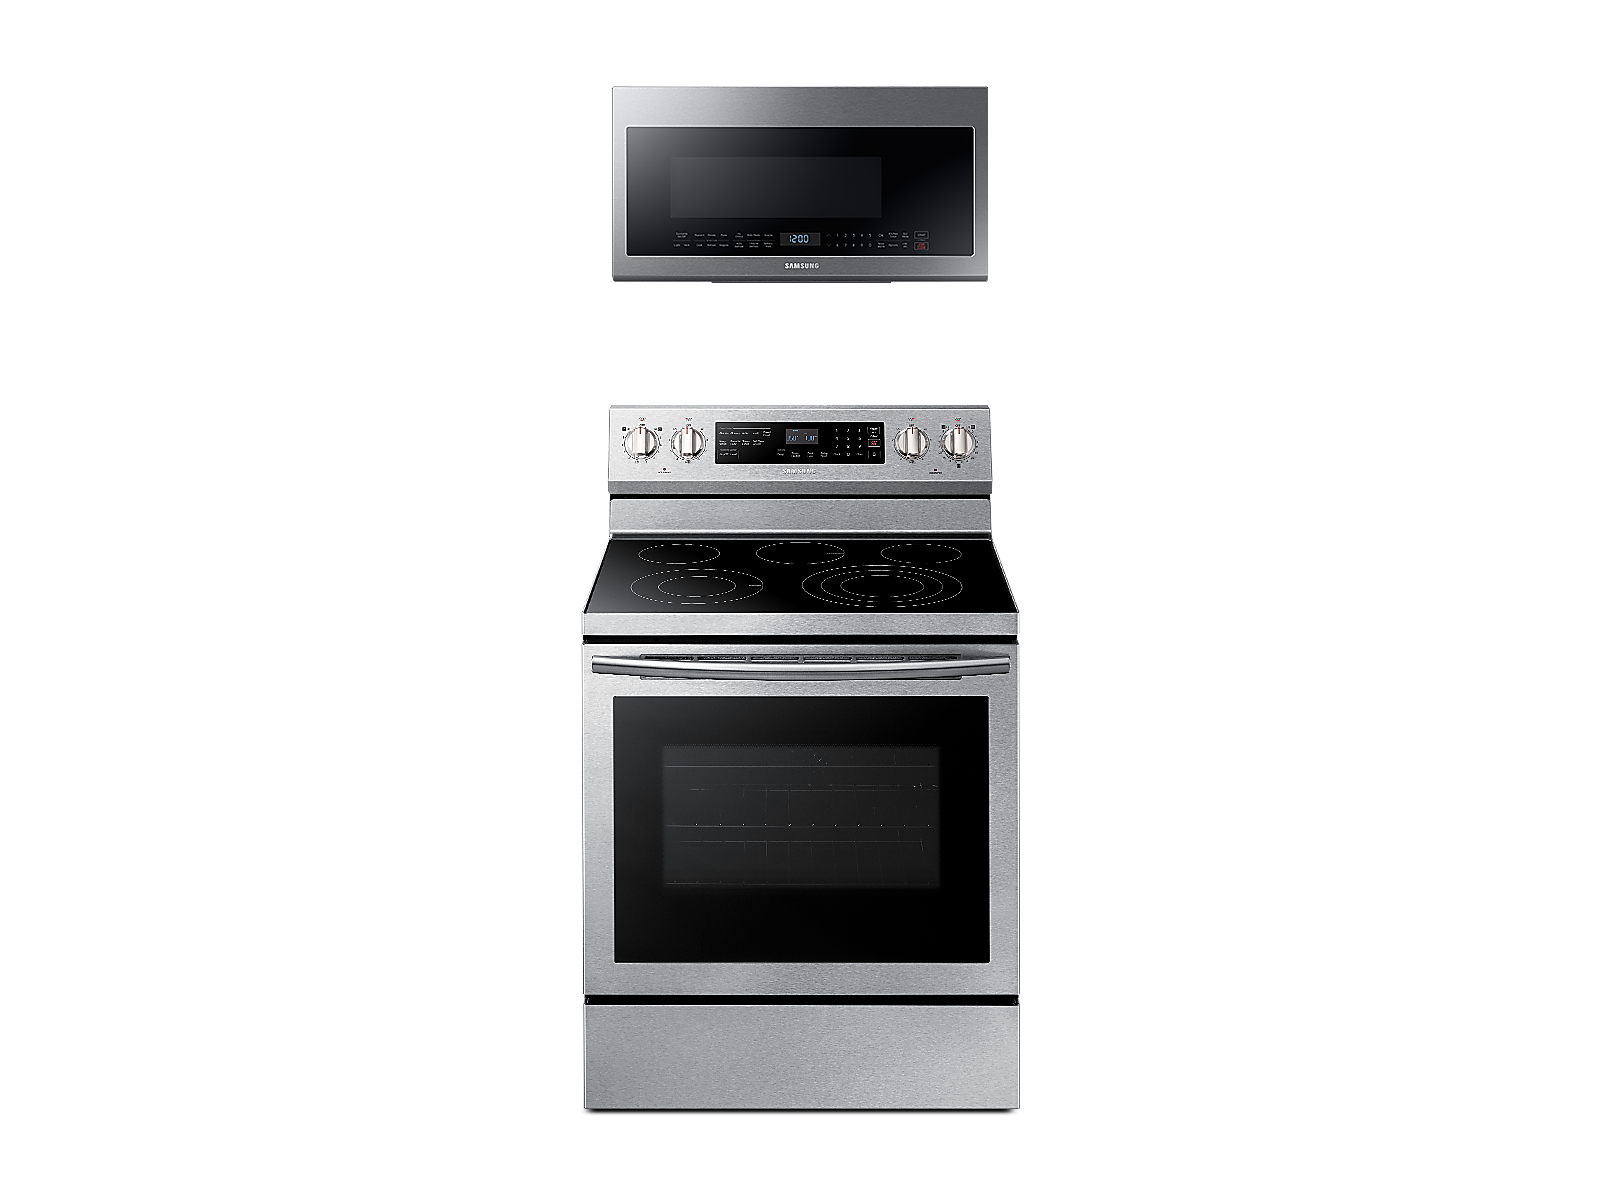 Samsung Freestanding Electric Range with True Convetion + Over-the-Range Microwave in Stainless Steel(BNDL-1646291346244)